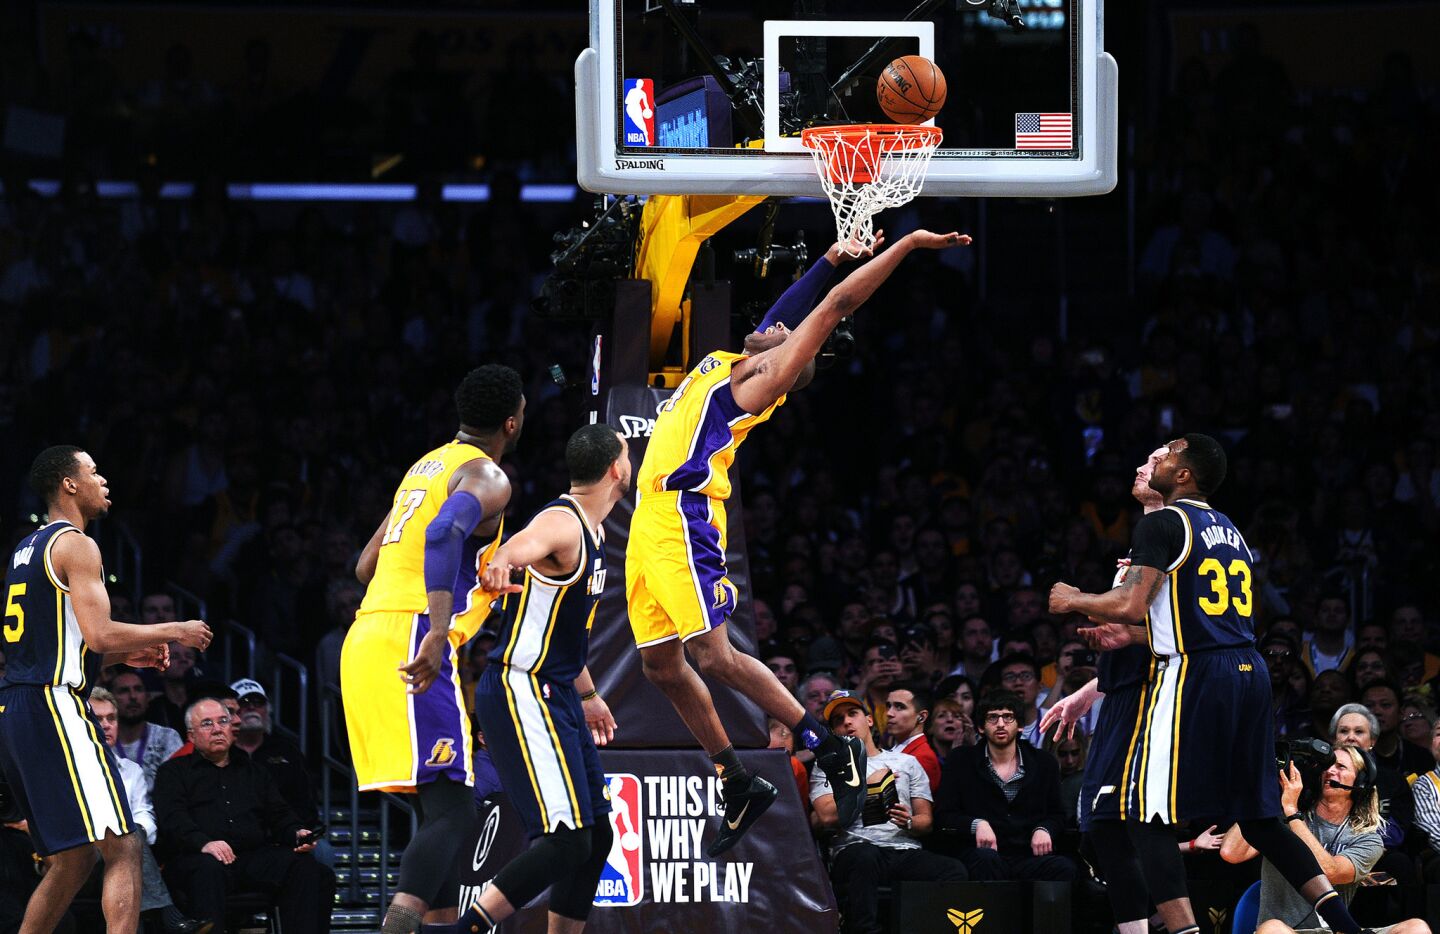 Kobe Bryant stretches out as he makes a basket during his final game as a Laker on April 12 at Staples Center.